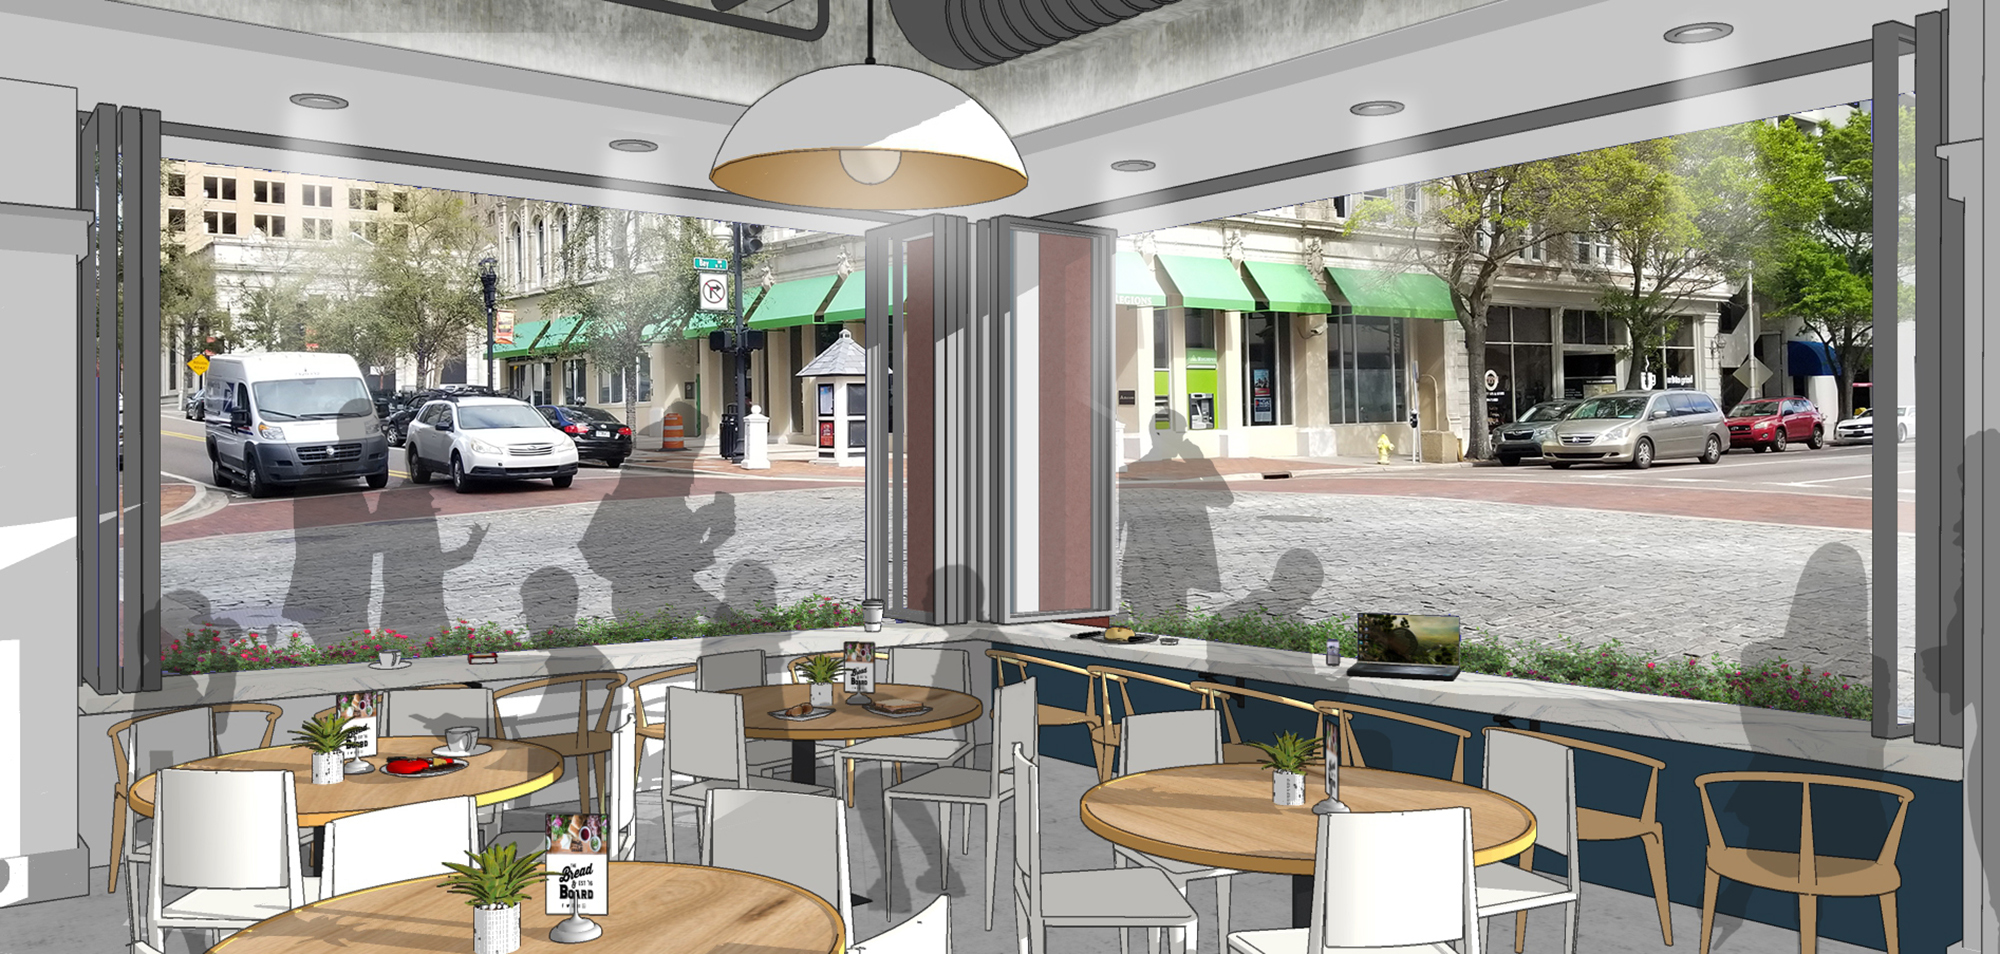 Renderings of Bread & Board Provisions, proposed on the ground floor of 100 W. Bay St.